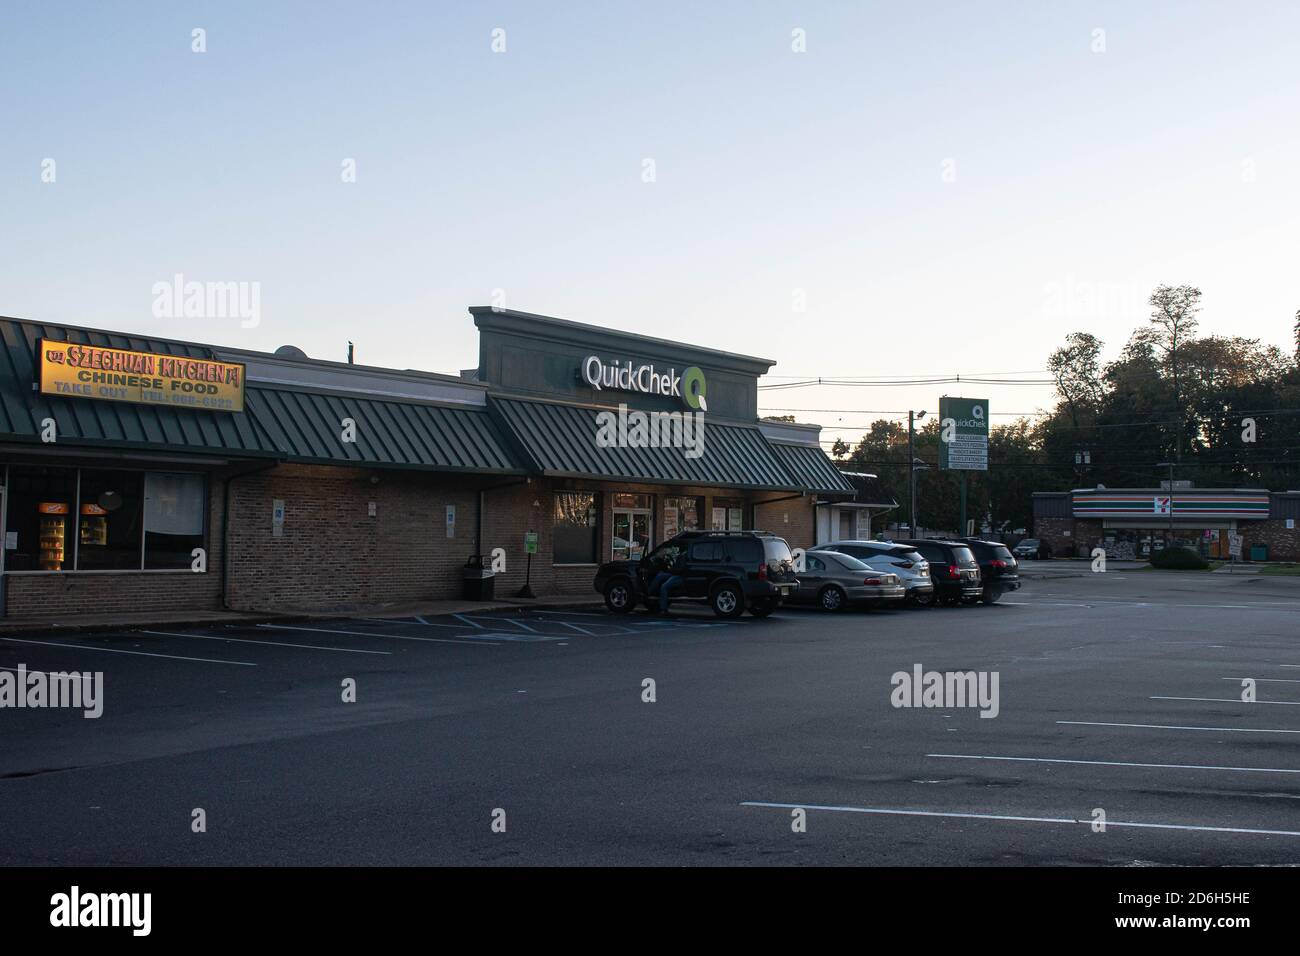 An old Quickcheck location during the evening Stock Photo